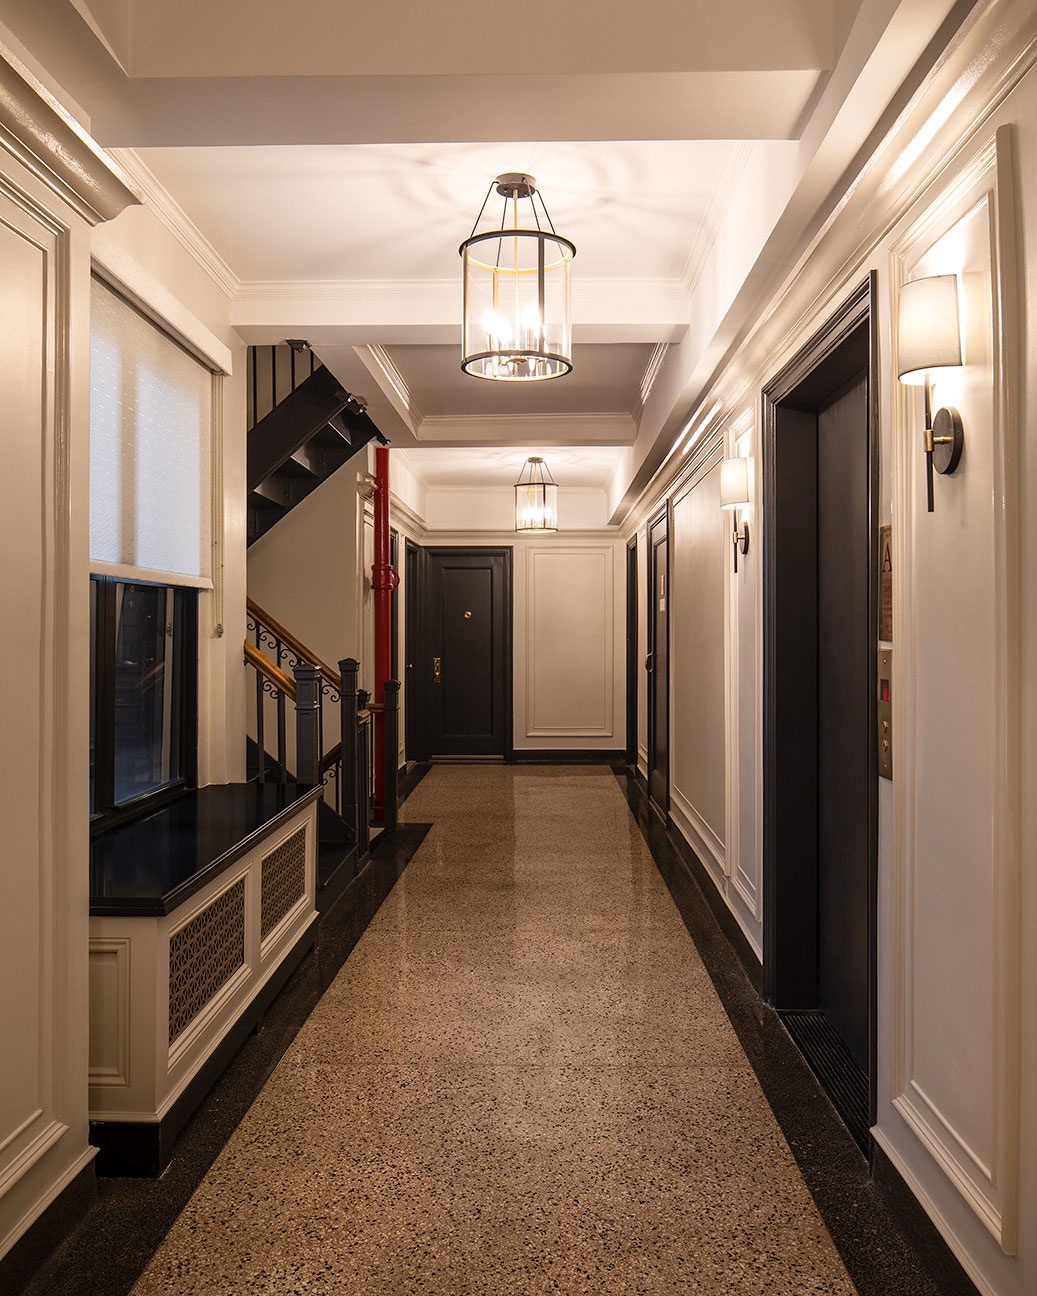 Is a Minimalist Approach Practical For The Hallway Design?